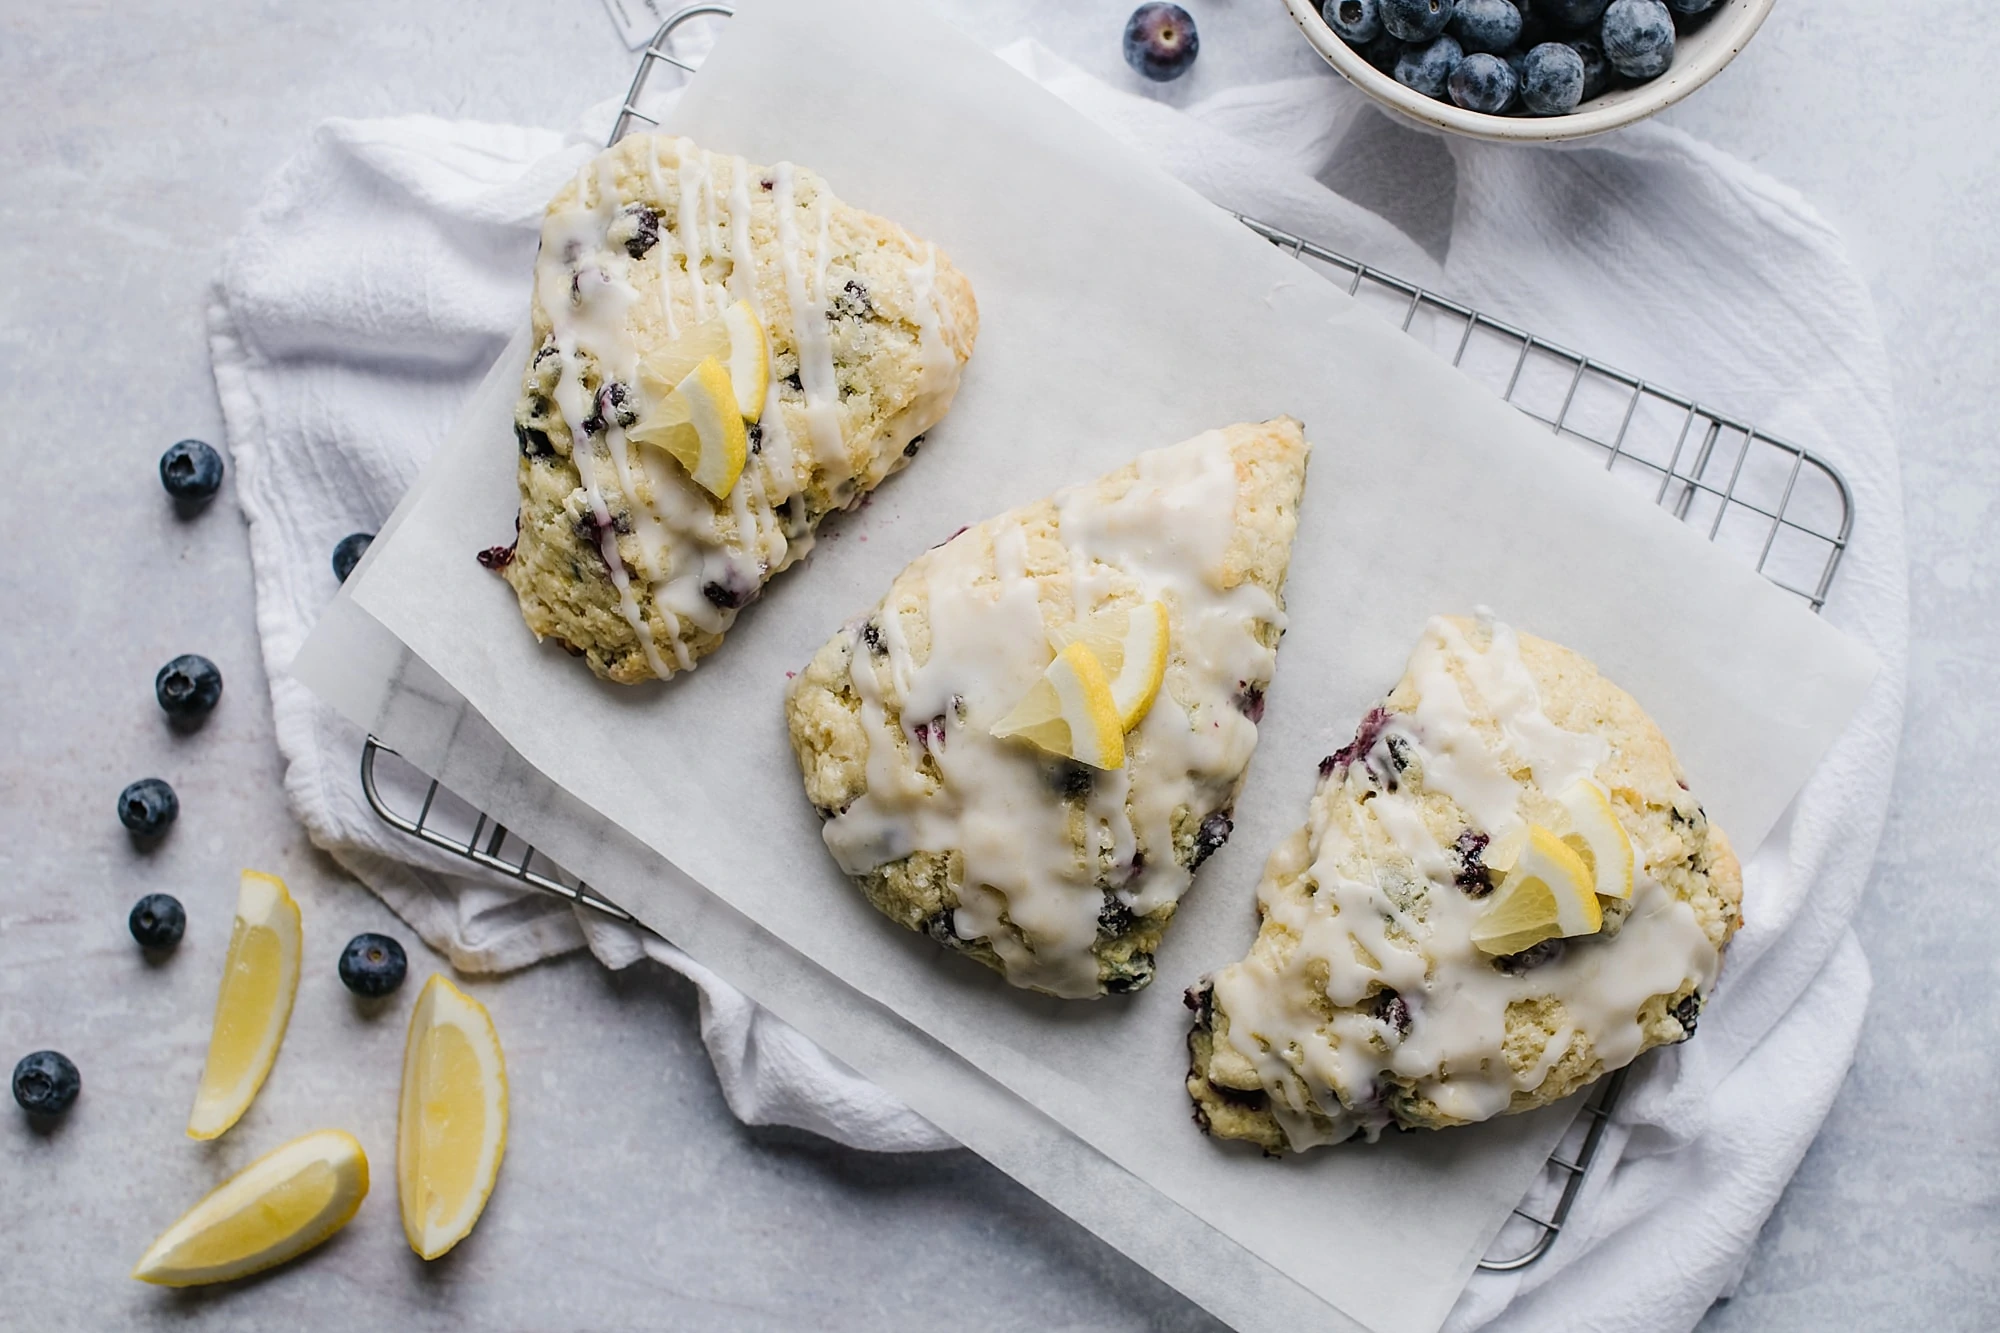 scones with blueberries and lemon glaze on parchment paper with blueberries in white bowl